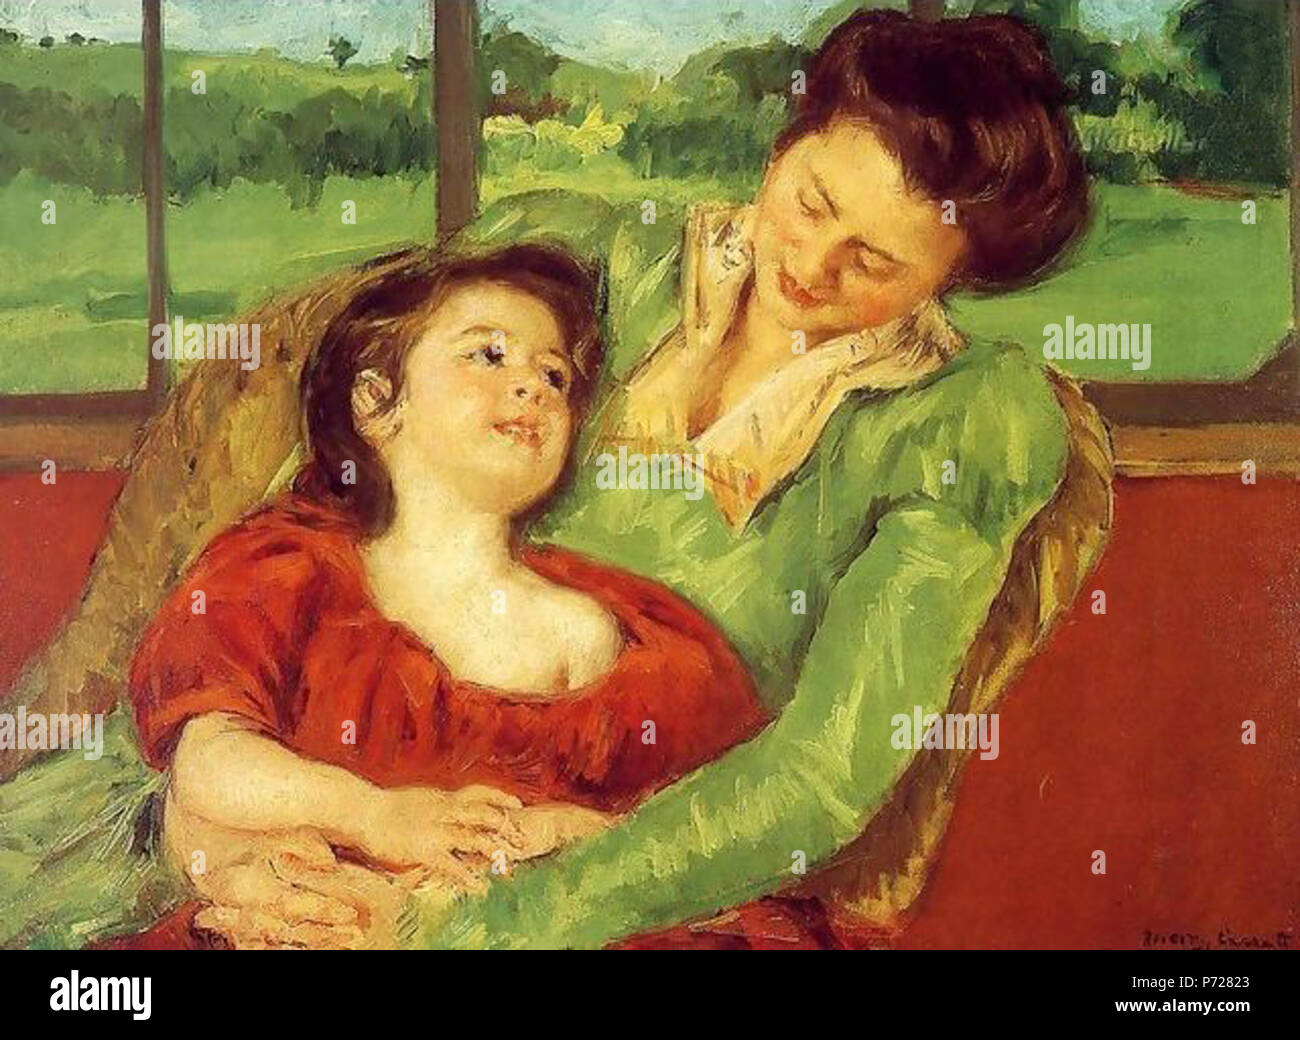 .  English: Reine Lefebre and Margot before a Window Français : Mère et enfant .  Mary Cassatt (1845–1926) exhibited a painting entitled Mère et enfant, 1903, in Oil, at the 1913 Armory Show. It was listed for sale at the show from New York 493, Gallery O, Durand-Ruel & Sons, $4,950 It has more recently been identified by the title Reine Lefebre and Margot before a Window (1902). Mary Cassatt: A Catalogue Raisonné of the Oils, Pastels, Watercolors, and Drawings, Washington: Smithsonian Institution Press, 1970 (164) identifies this painting as the one Cassatt exhibited for sale at the Armory Sh Stock Photo